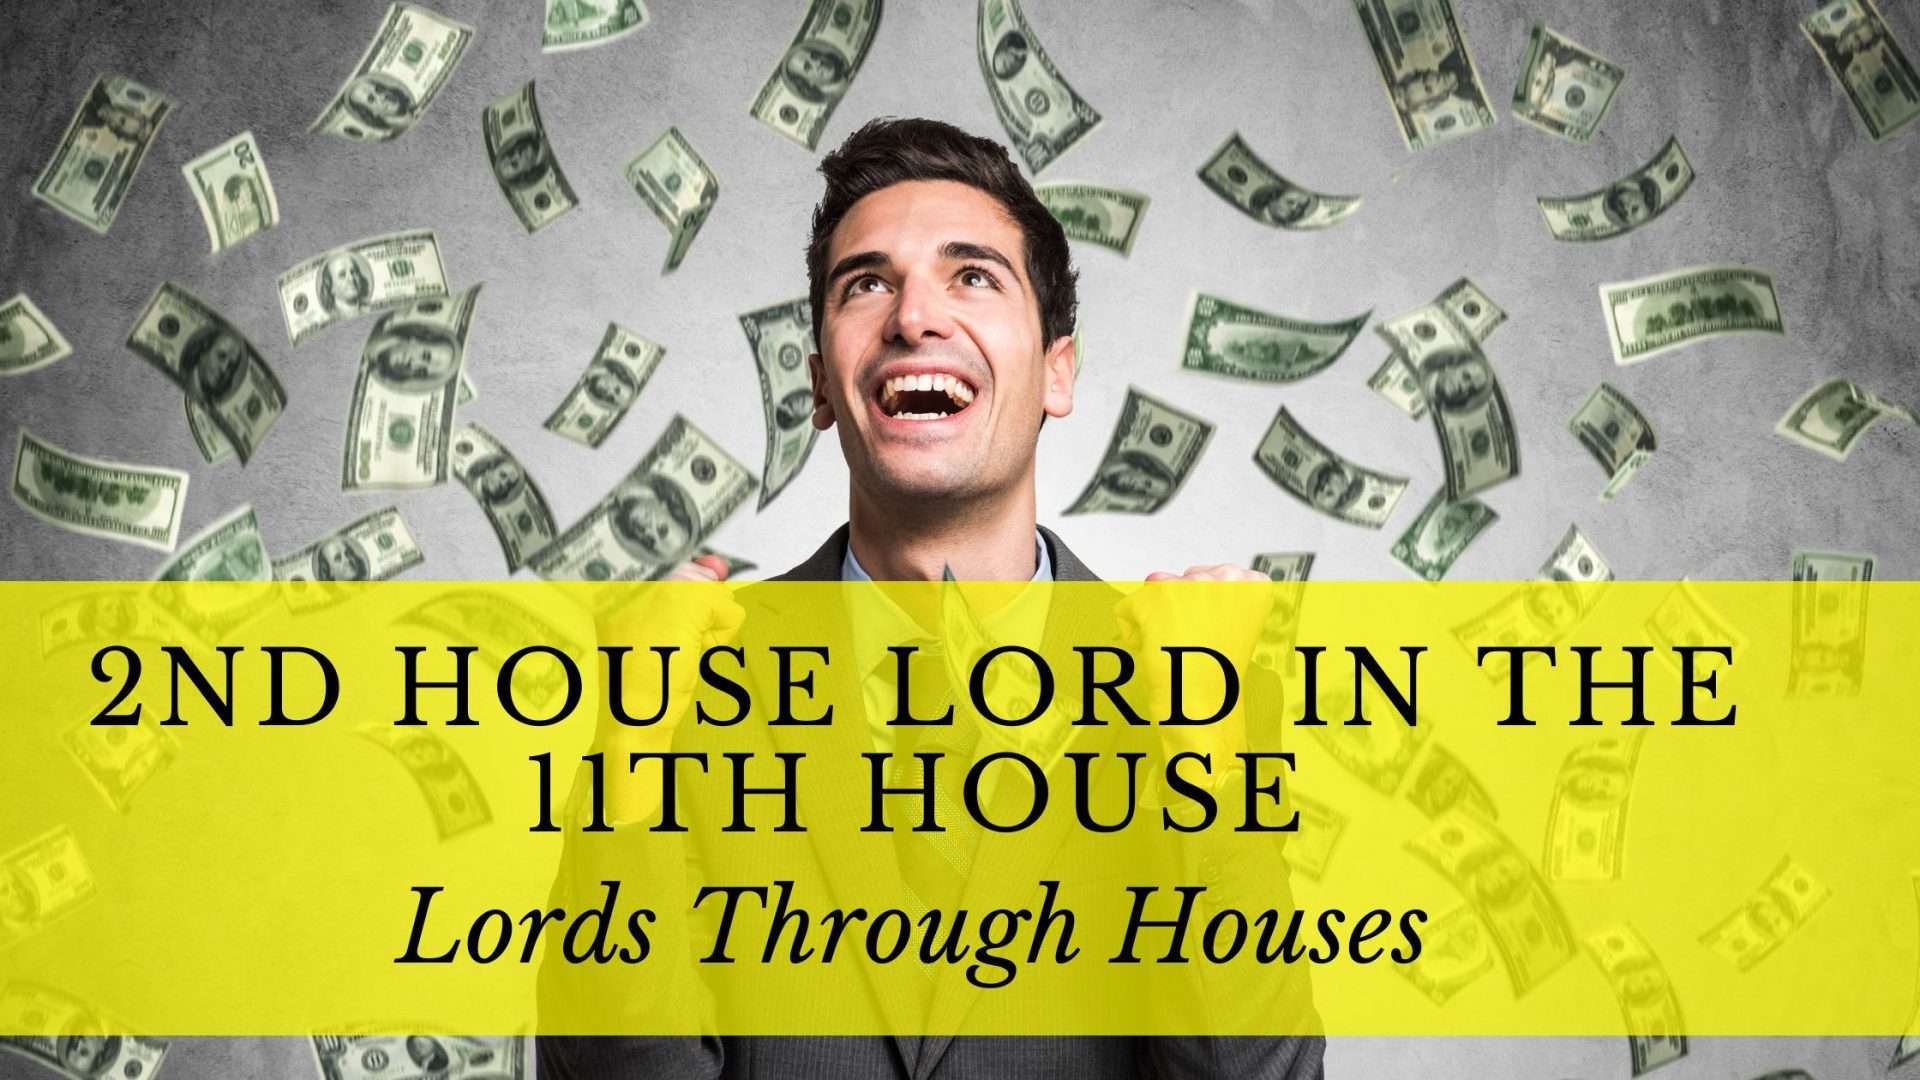 2nd house lord in the 11th house